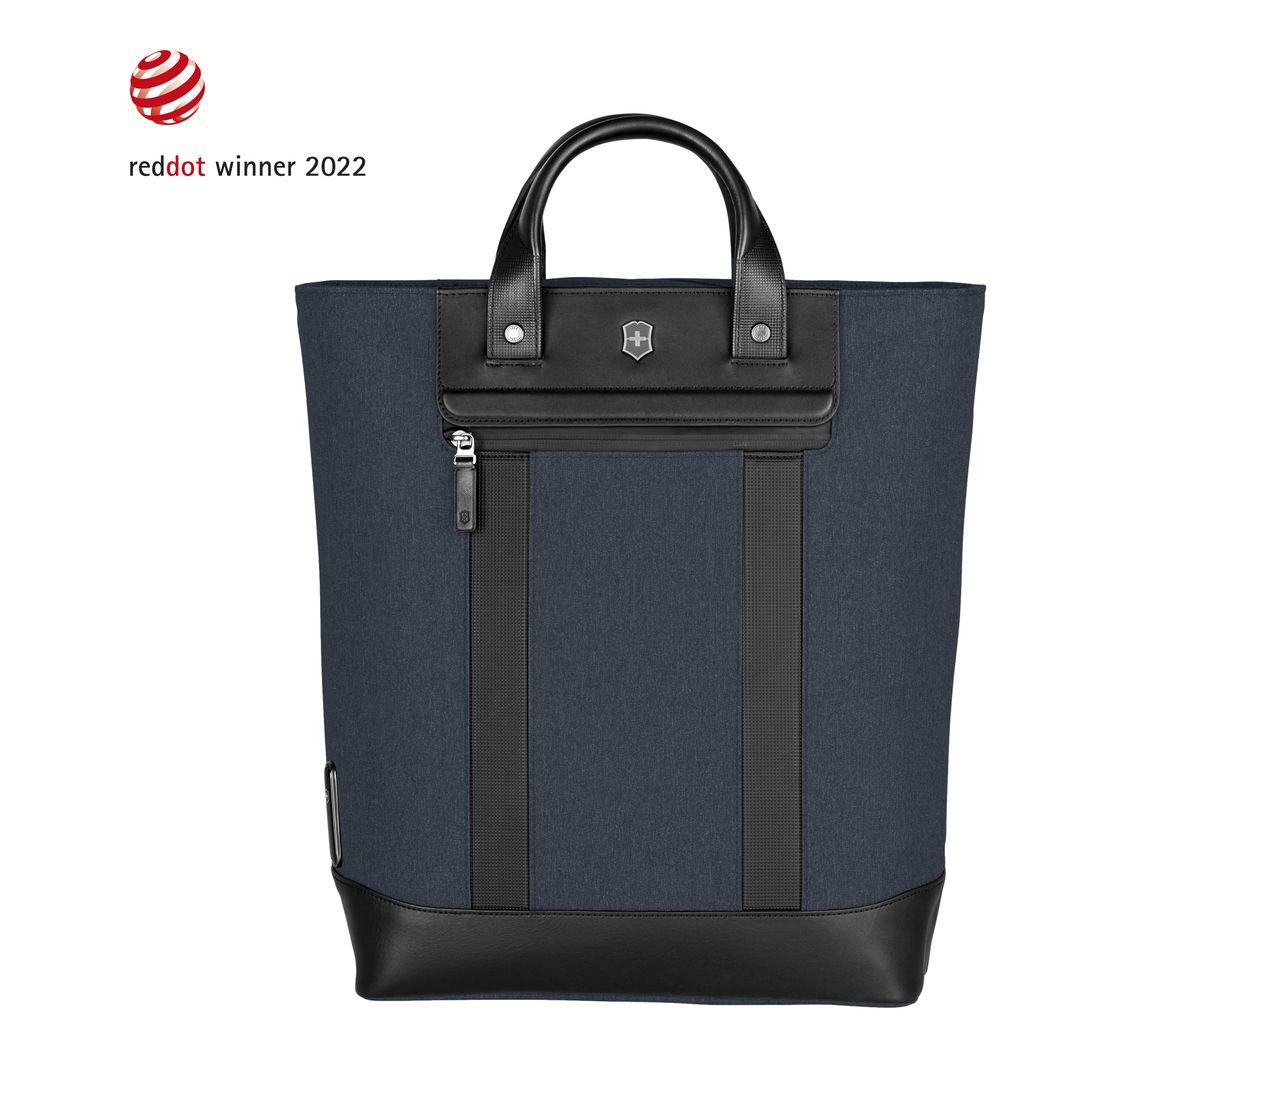 Architecture Urban2 2-Way Carry Tote-612672